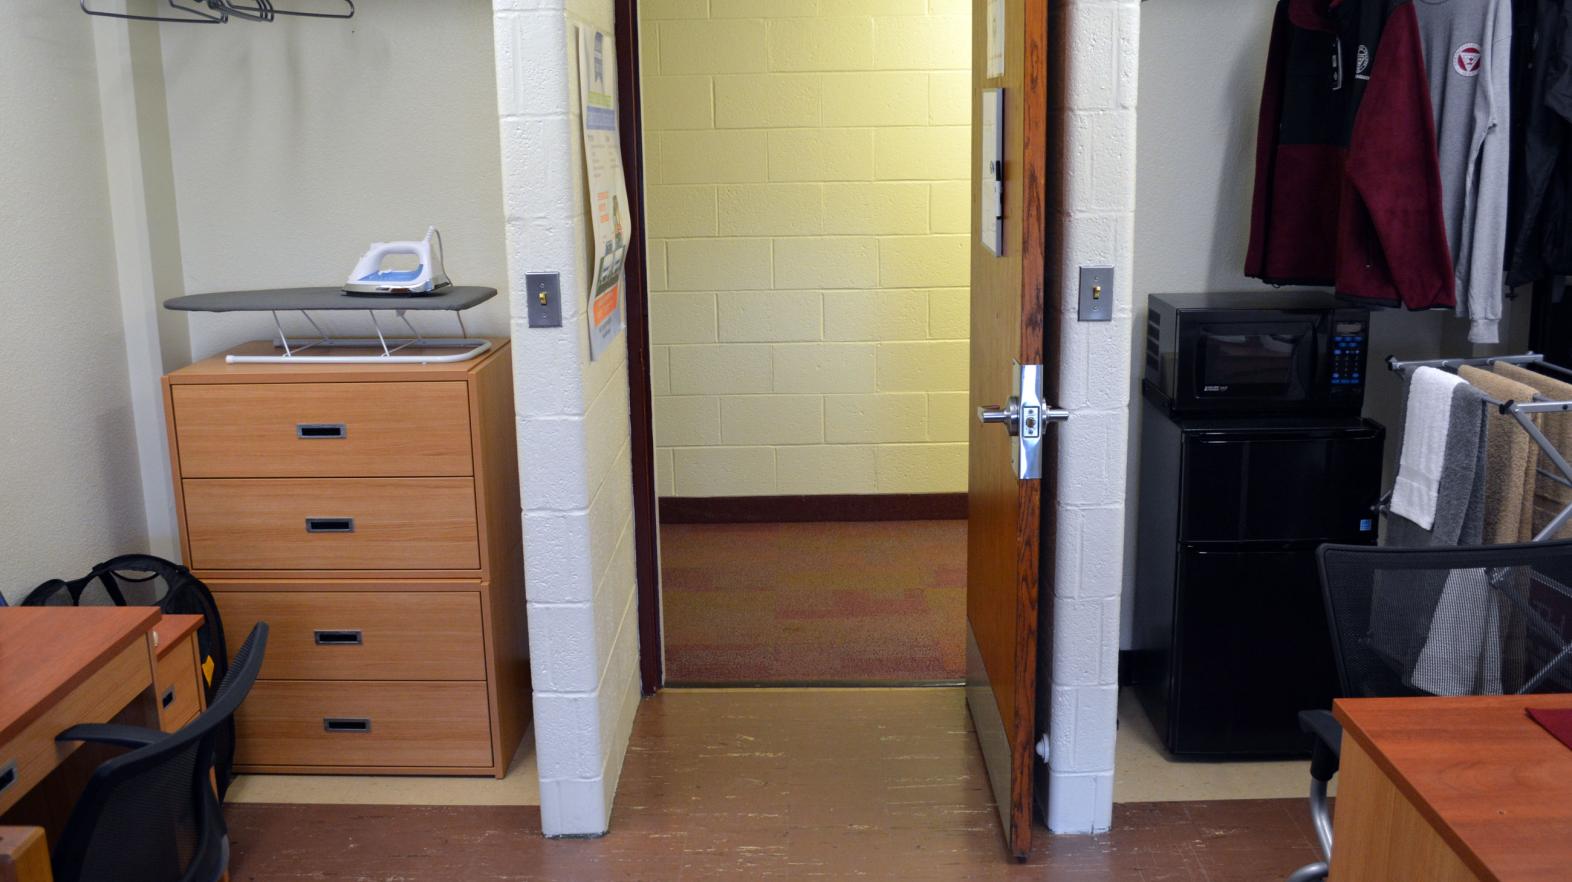 Massasoit Hall room with an open door and closet to show the community feel created in the residence hall.